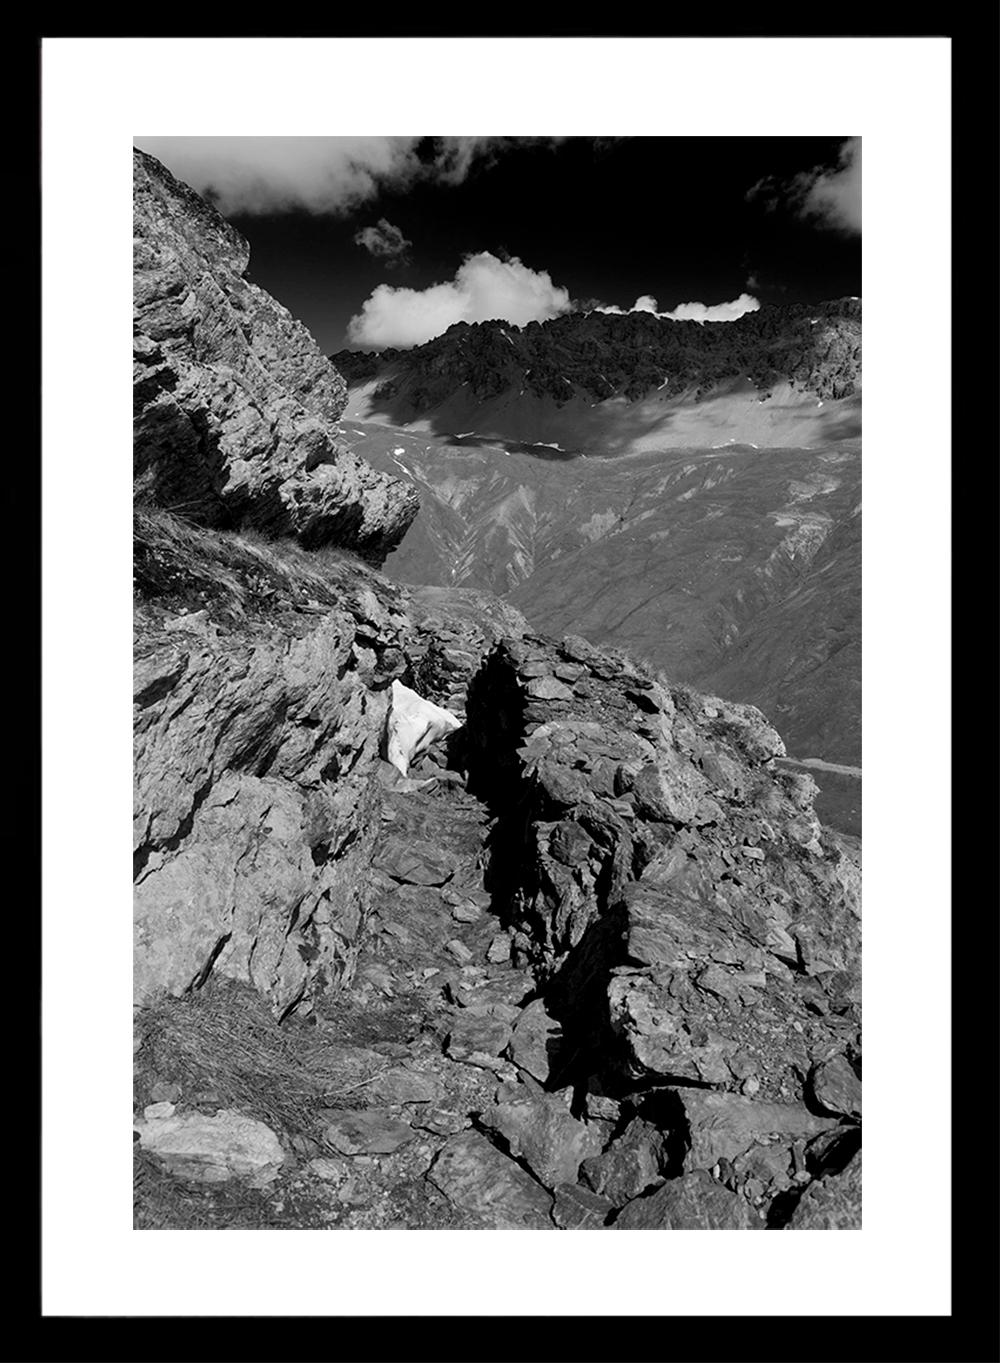 A Fatal Pass, trenches in the Italian Alps, Diptych. Landscape B&W photograph - Contemporary Photograph by Luca Artioli